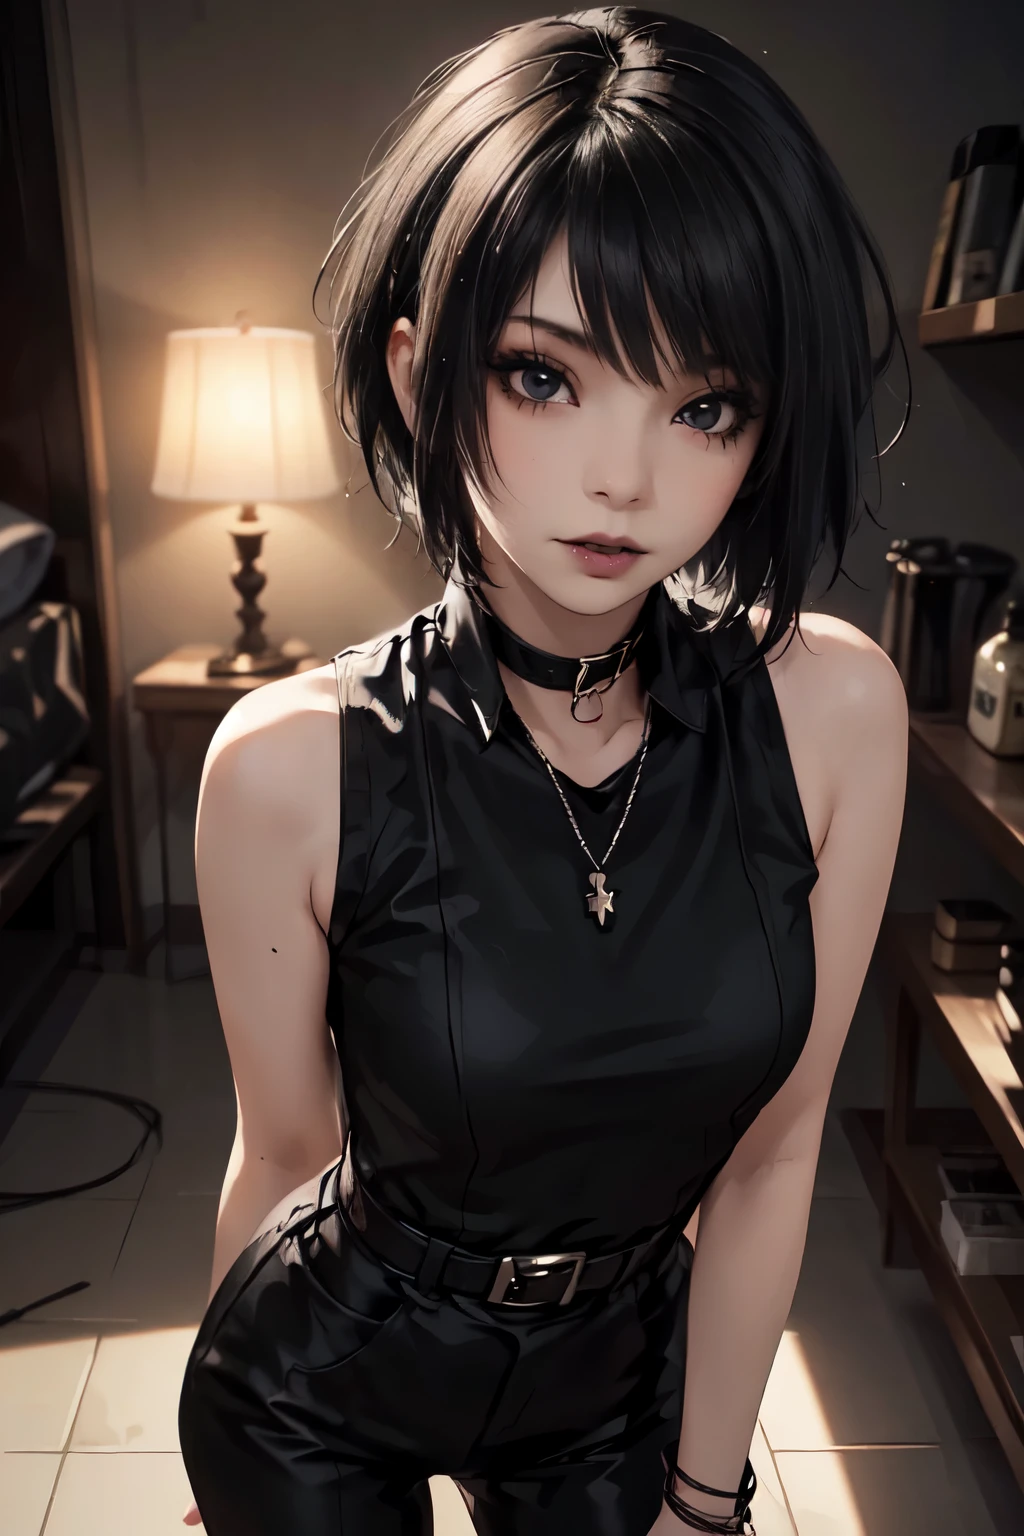 1Girl, woman, emo_hairstyle, black lipstick, dog collar, eyeliner, eye shadow, smoky eyes, realistic lighting, short hair, standing up, sexy military outfit, sleeveless.